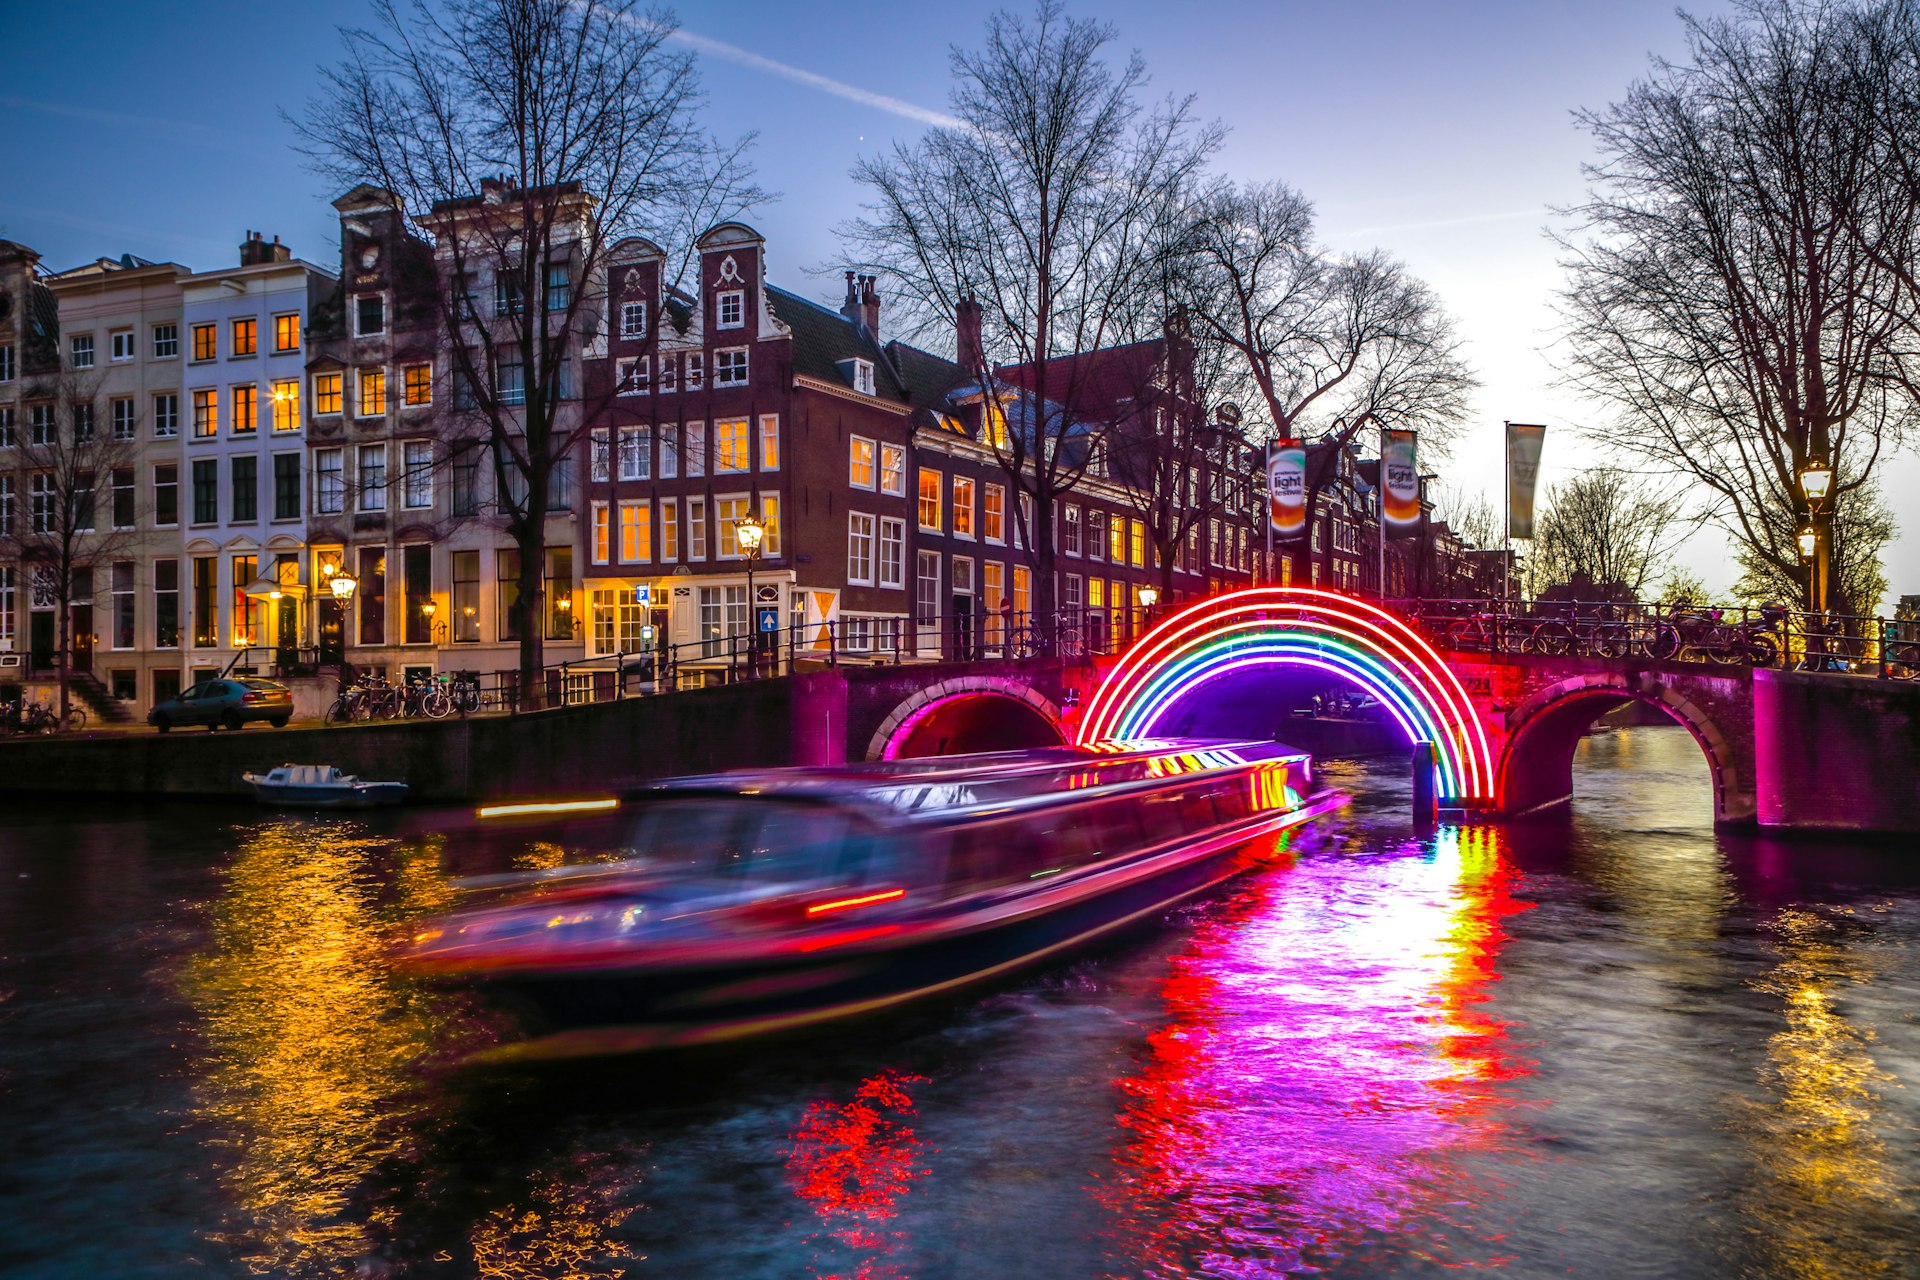 A boat passing through holiday light installations on an Amsterdam canal at night